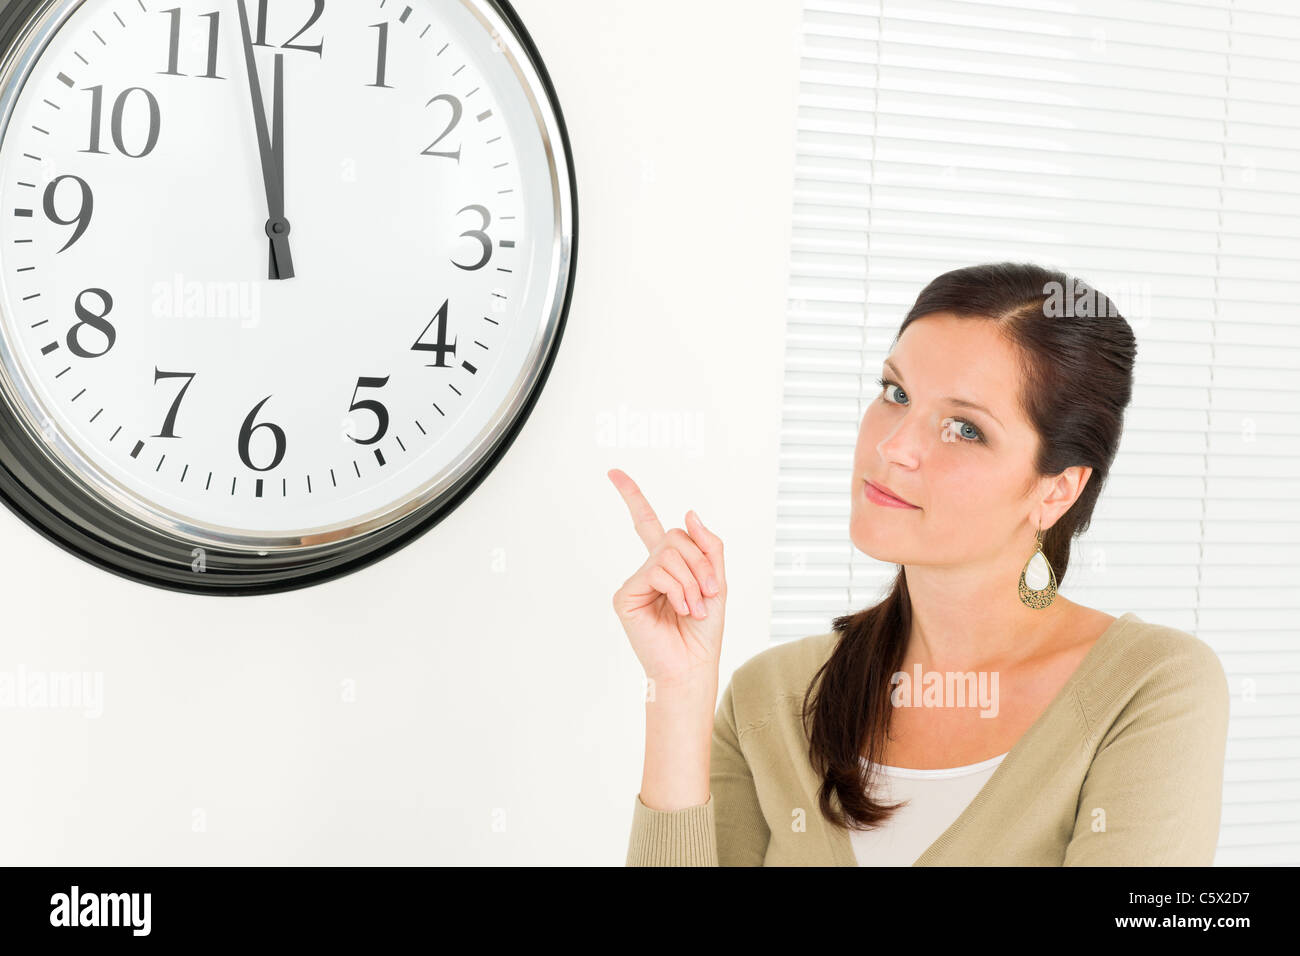 Punctual businesswoman young attractive pointing at clock portrait Stock Photo